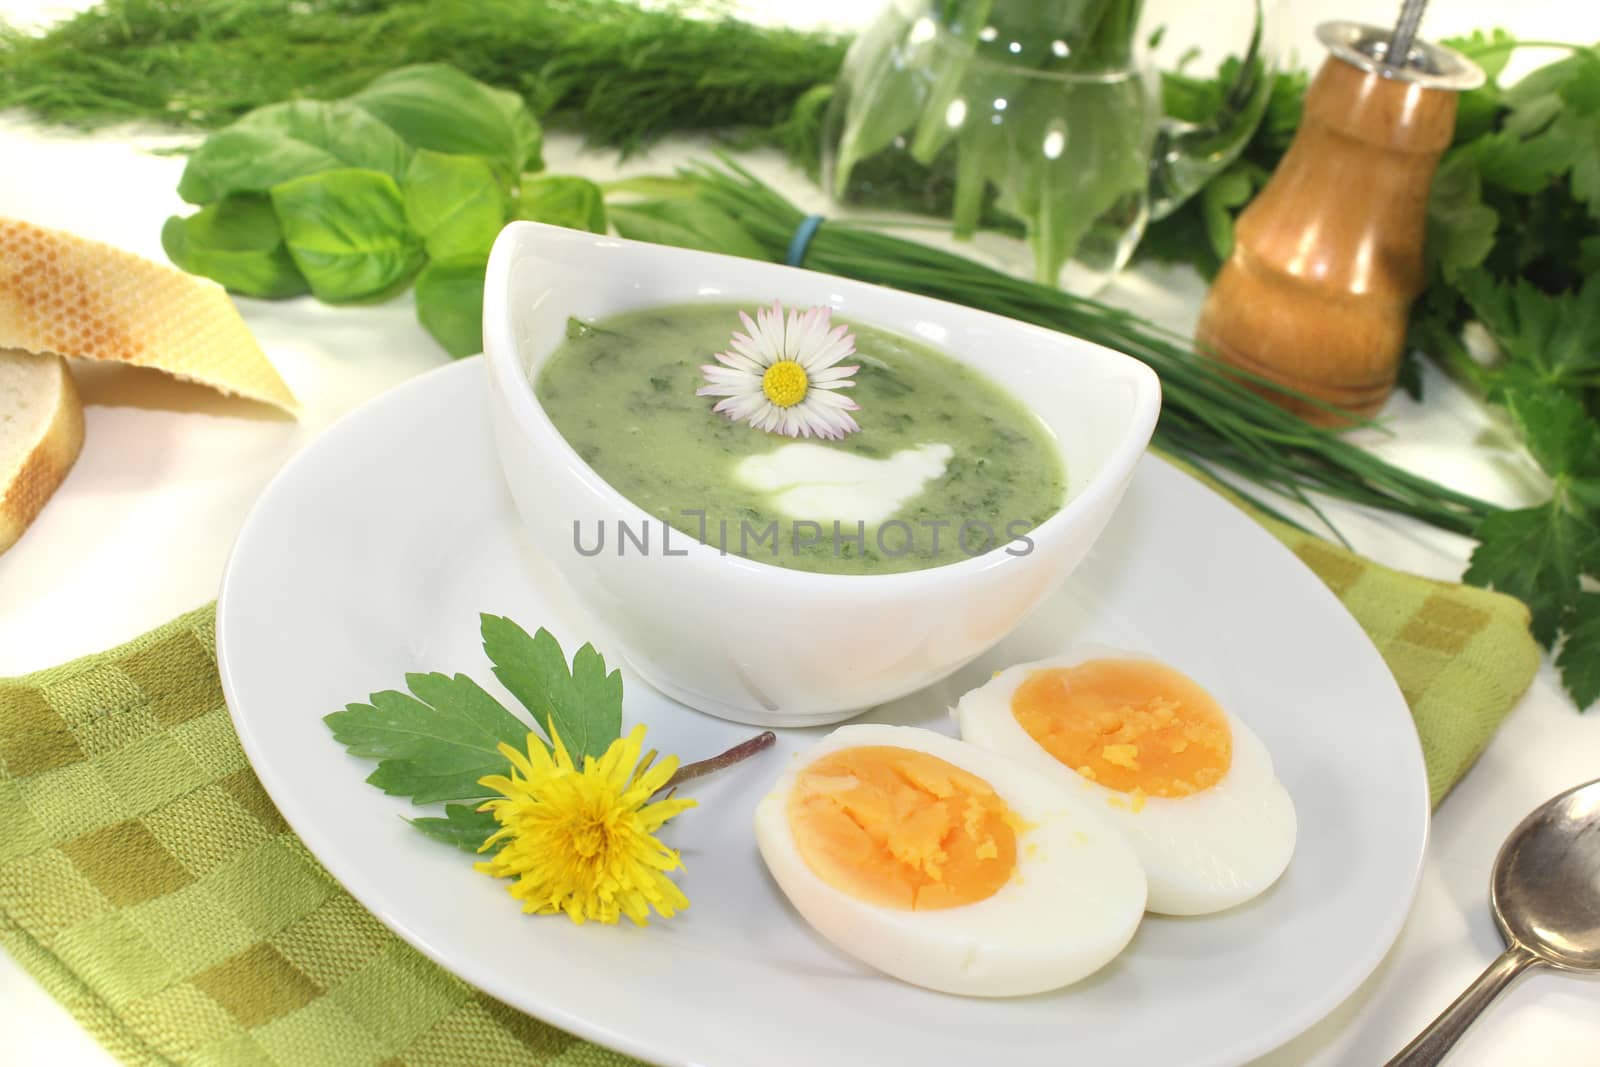 green herbs soup with eggs, a dollop of cream and daisy